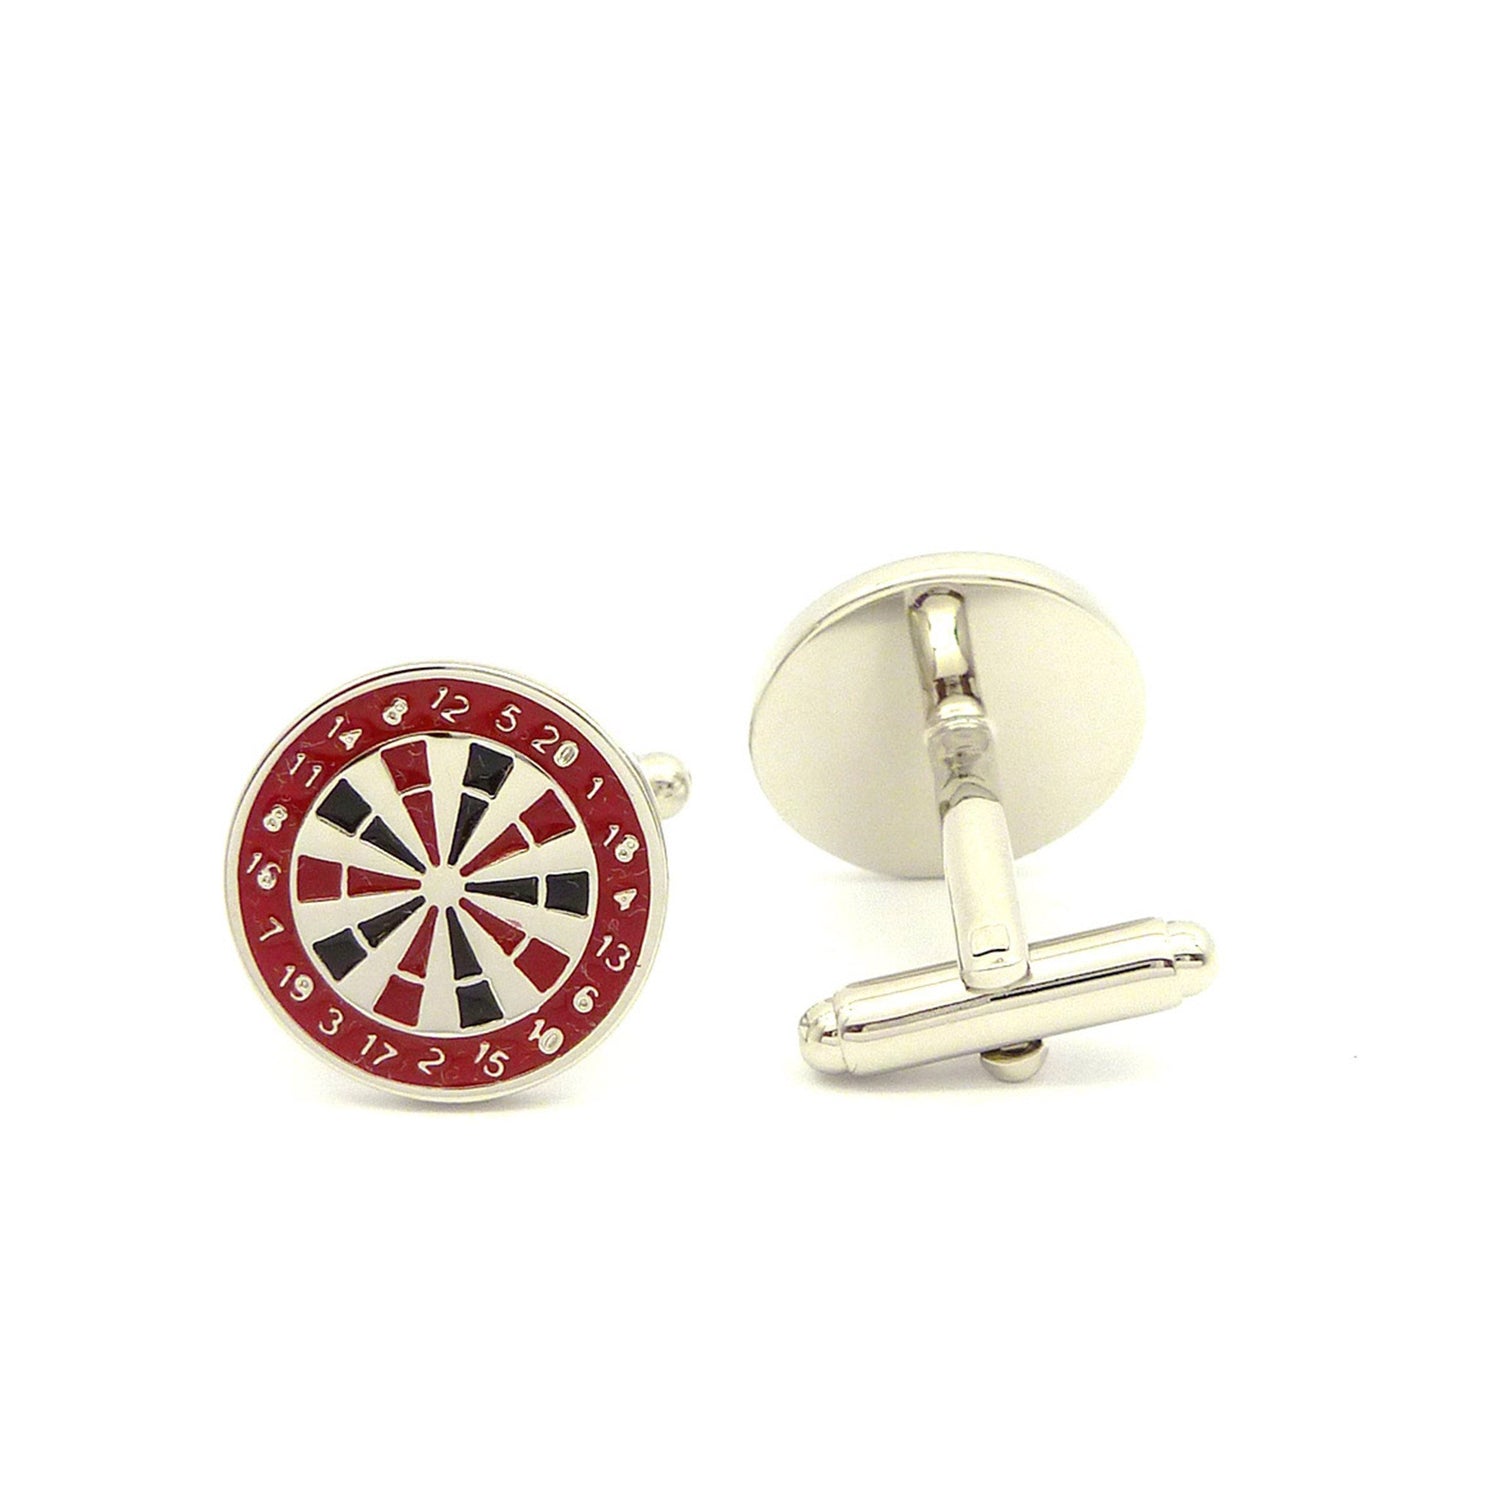 Red and Black  Dart Board Cufflinks for Men - SHOPWITHSTYLE